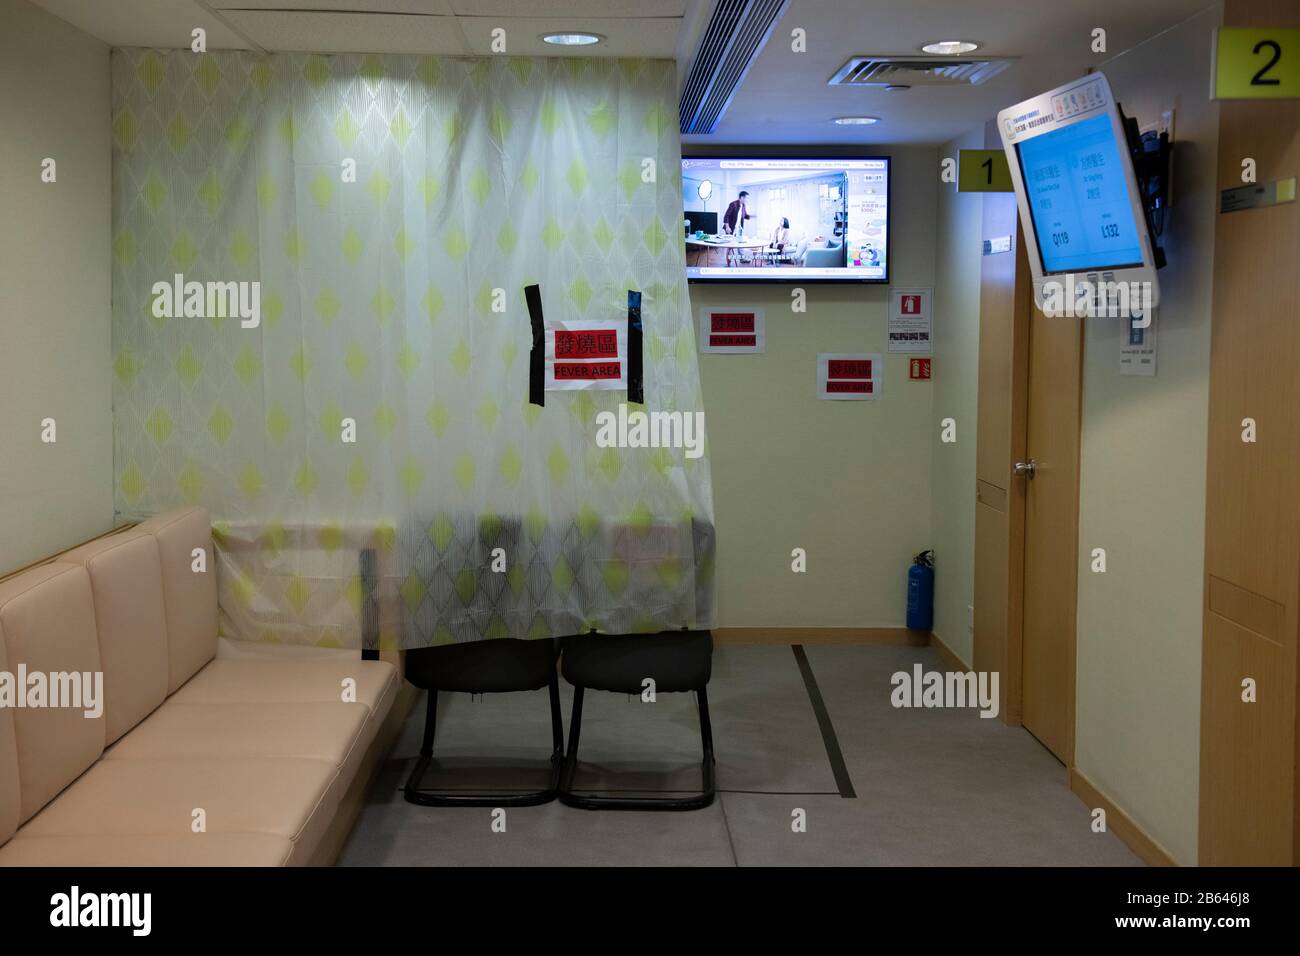 Hong Kong,China:13 Feb,2020.   A Doctors surgery puts shower curtains up to contain fevered patients during the Covid-19 outbreak. Quality Healthcare Stock Photo